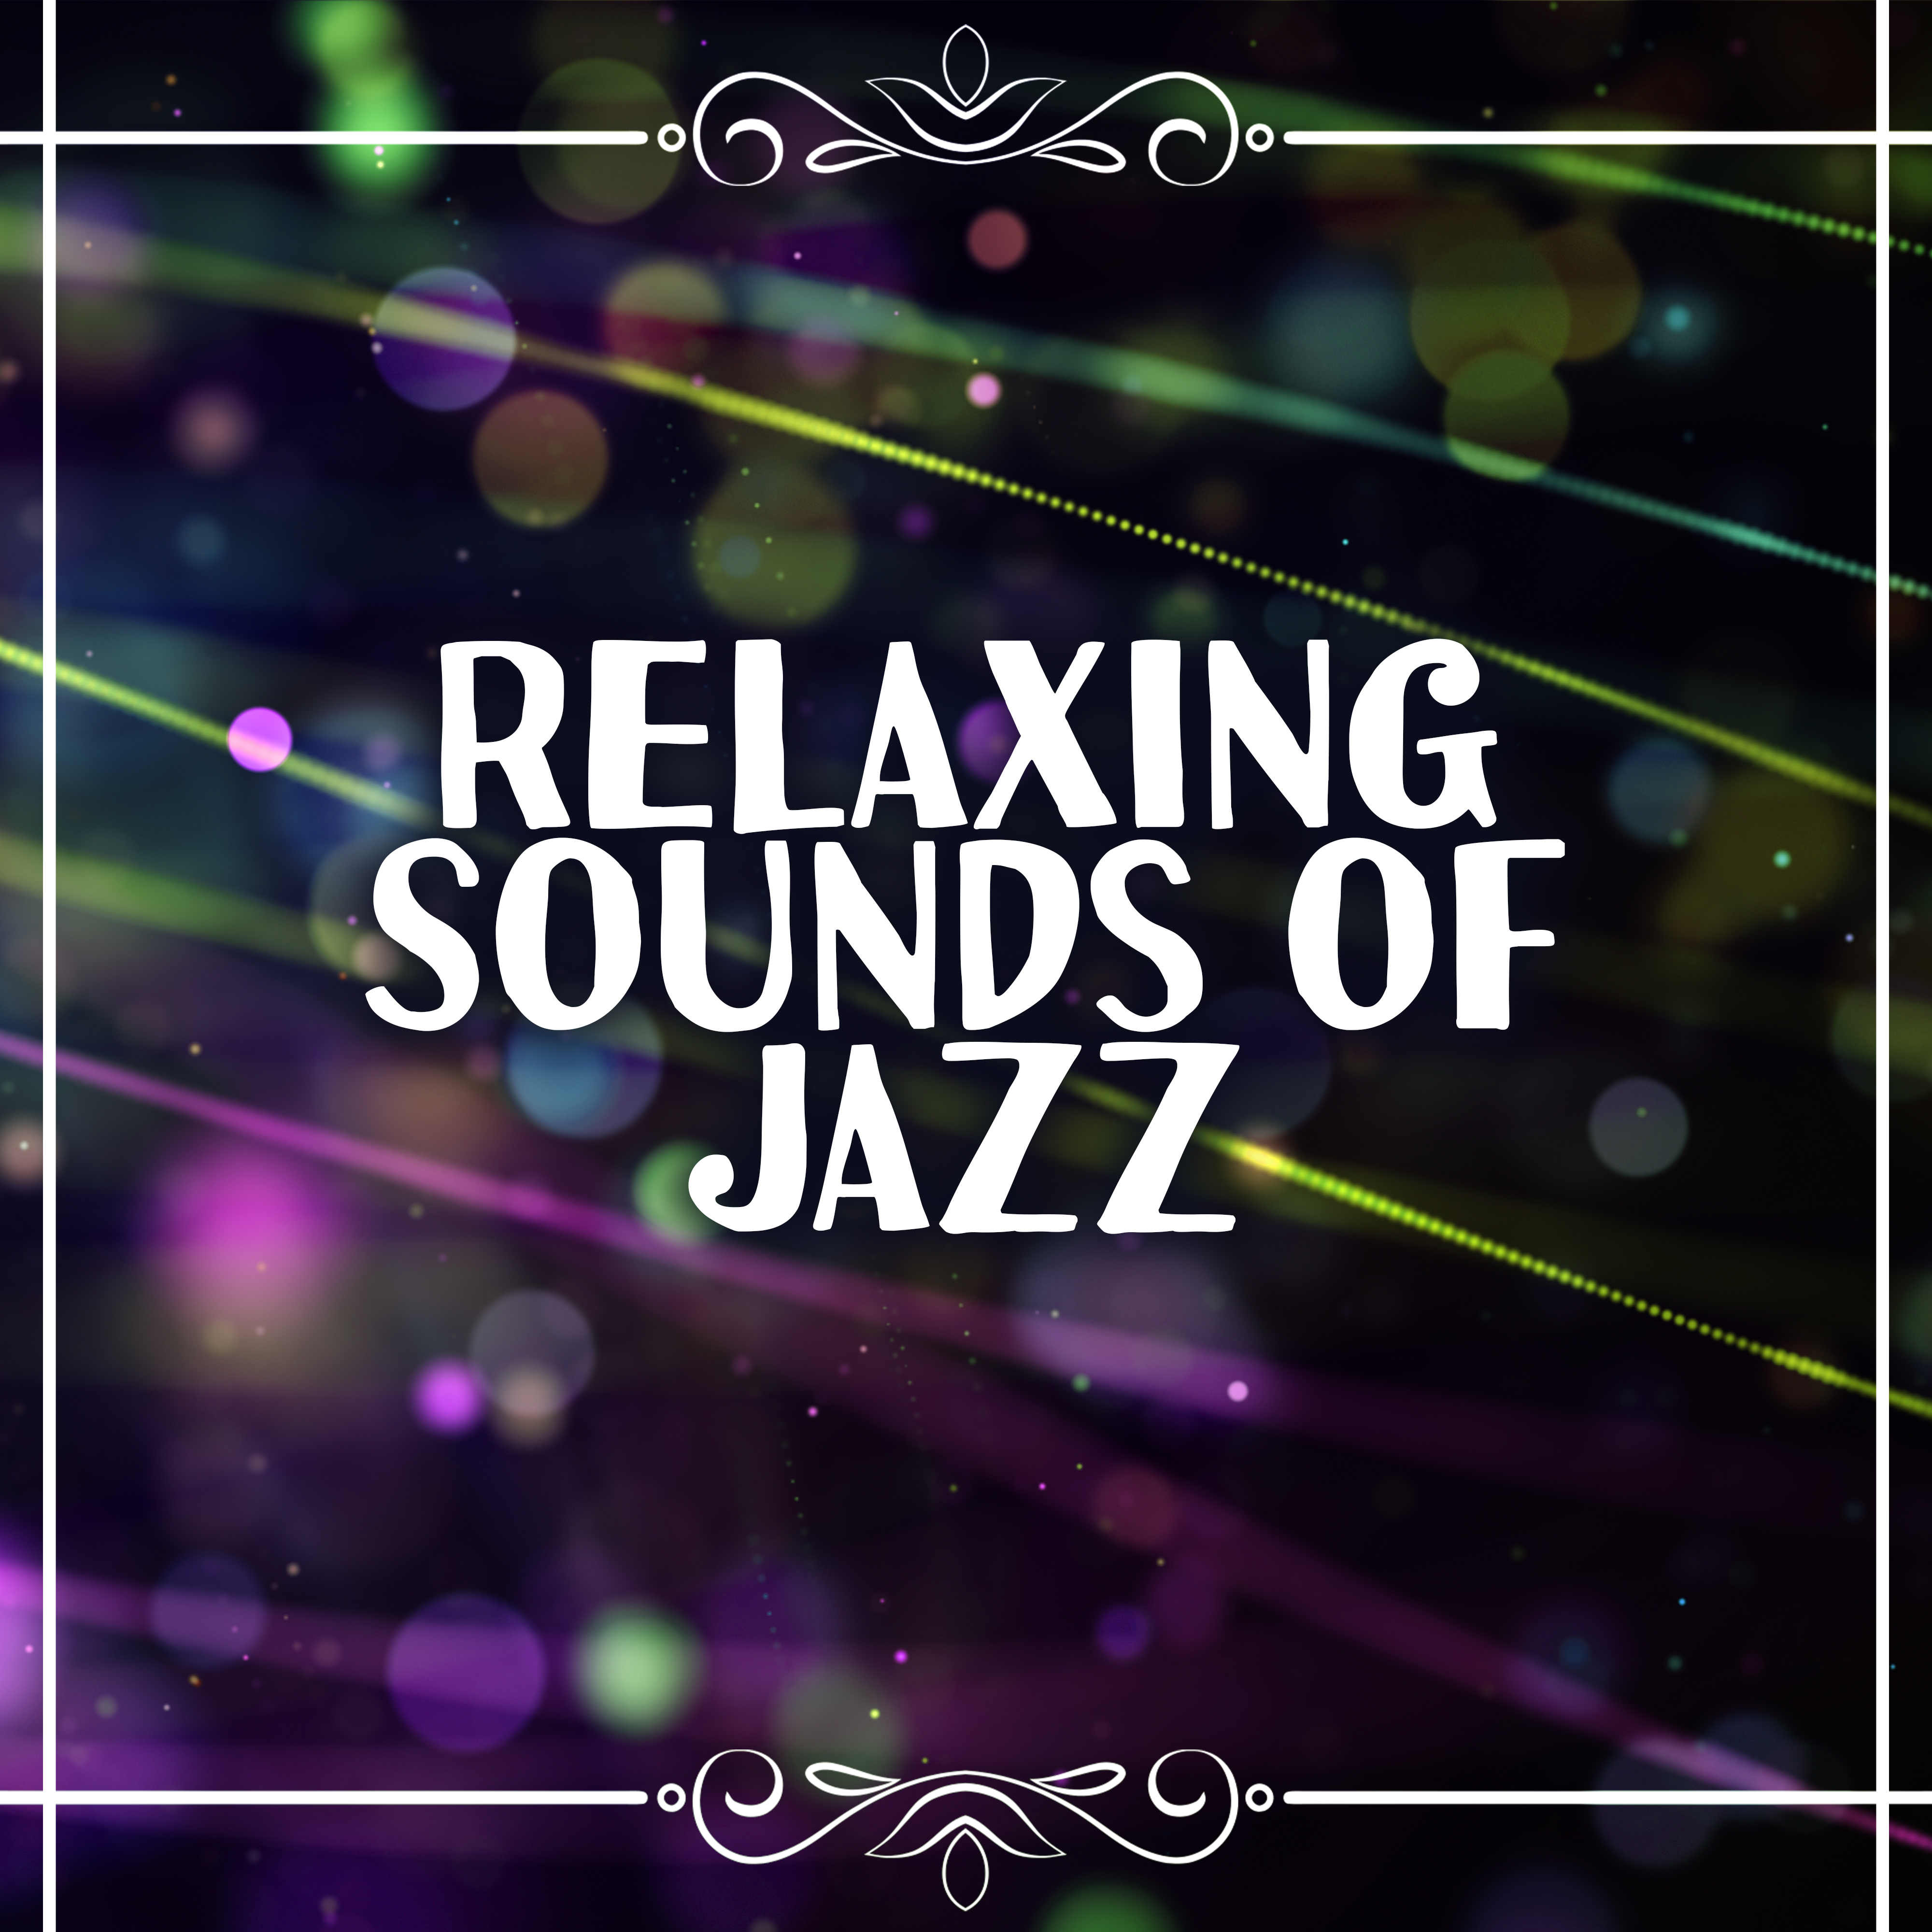 Relaxing Sounds of Jazz – Chilled Music, Soft Jazz Vibes, Sounds to Rest, Easy Listening